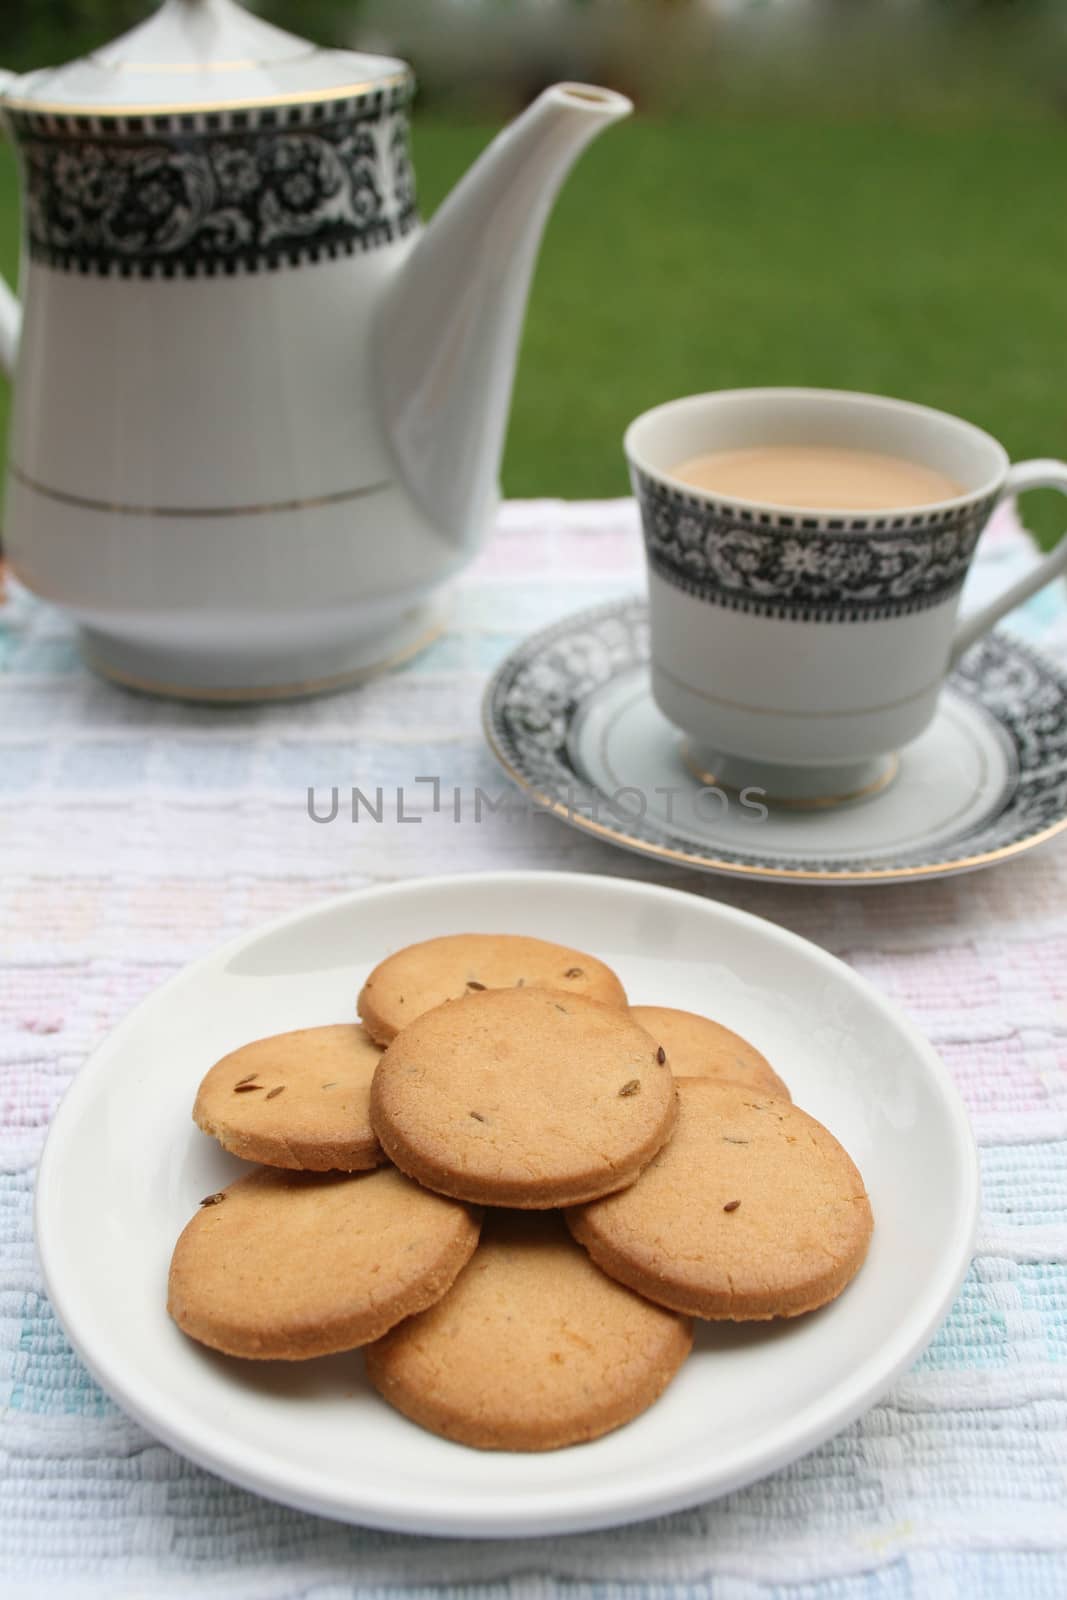 Plate full of biscuits served with tea pot and a cup by haiderazim